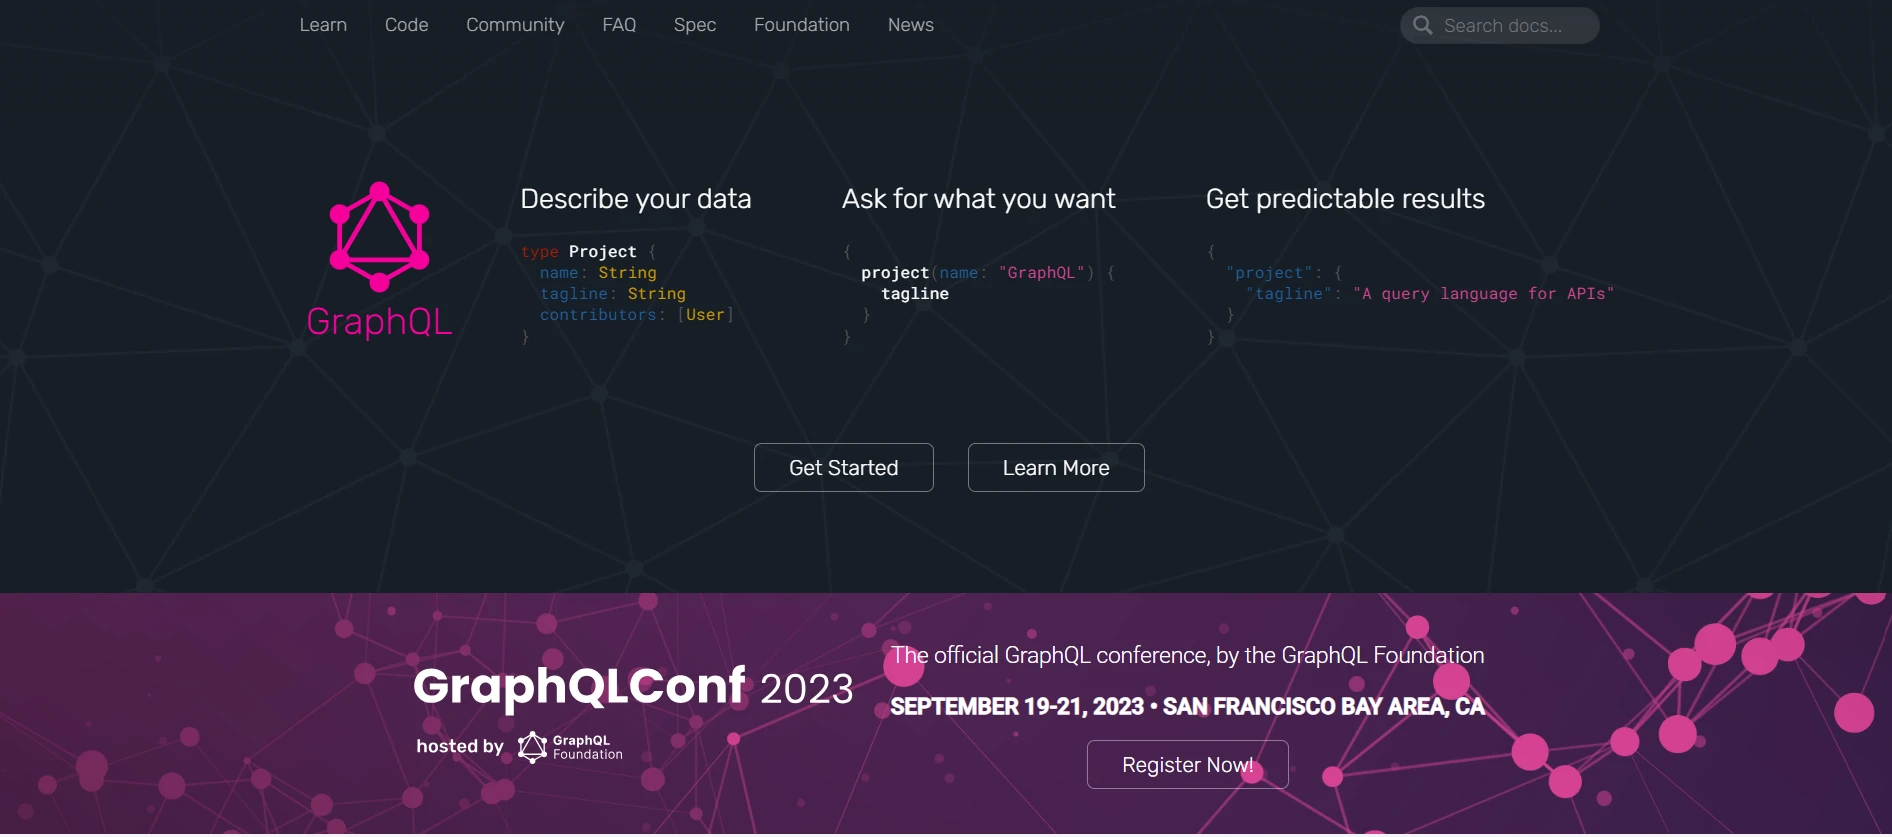 Graphql C# (How It Works For Developers): Figure 1